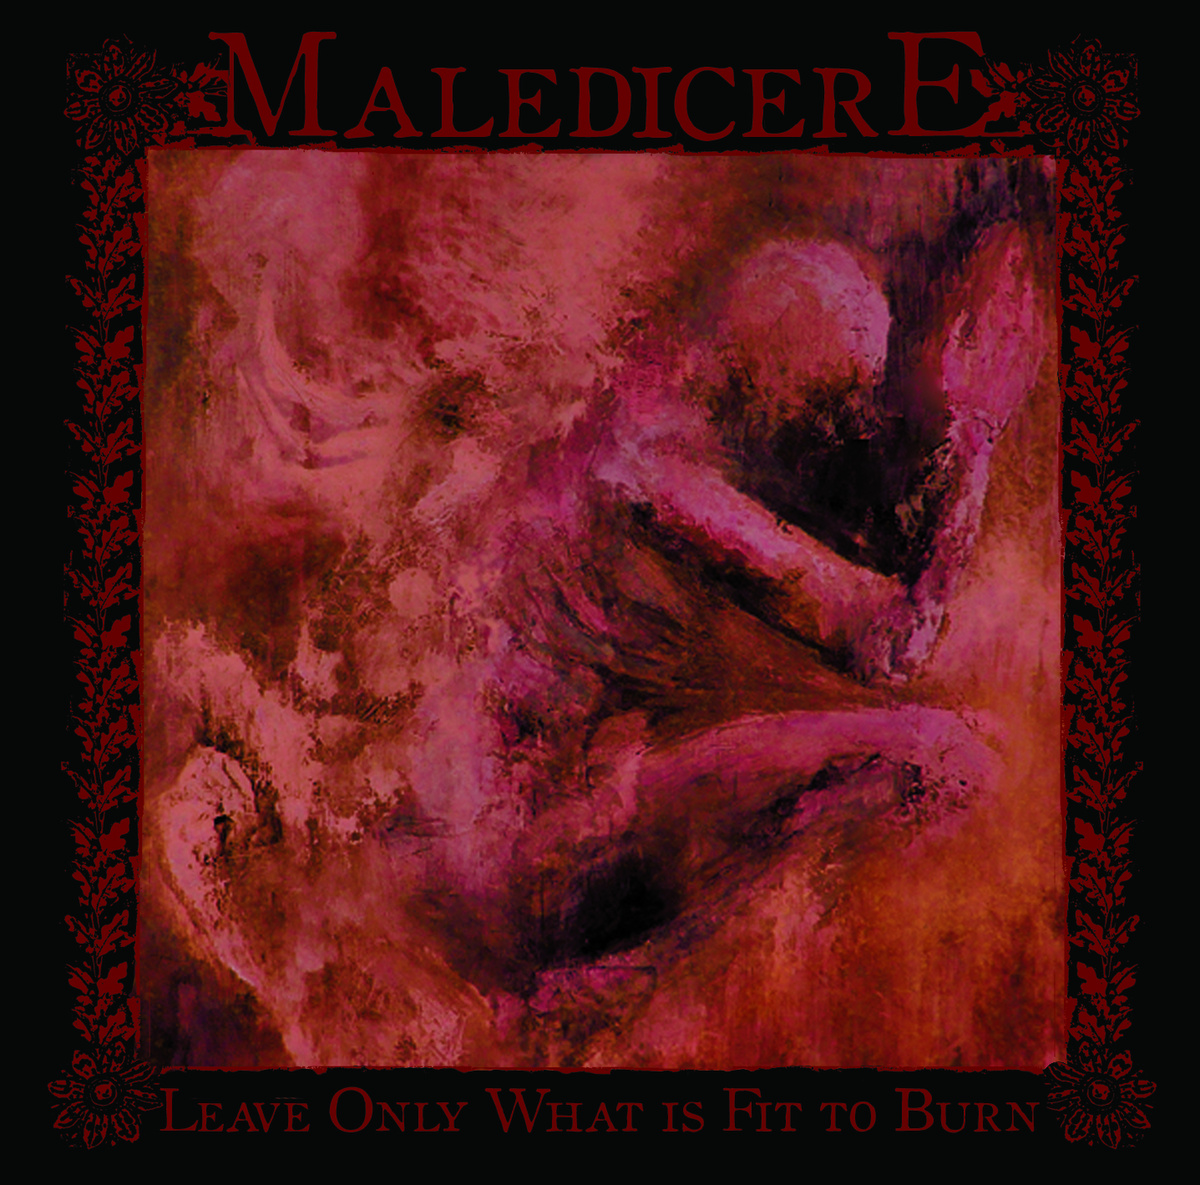 Maledicere - Leave Only What Is Fit to Burn CD